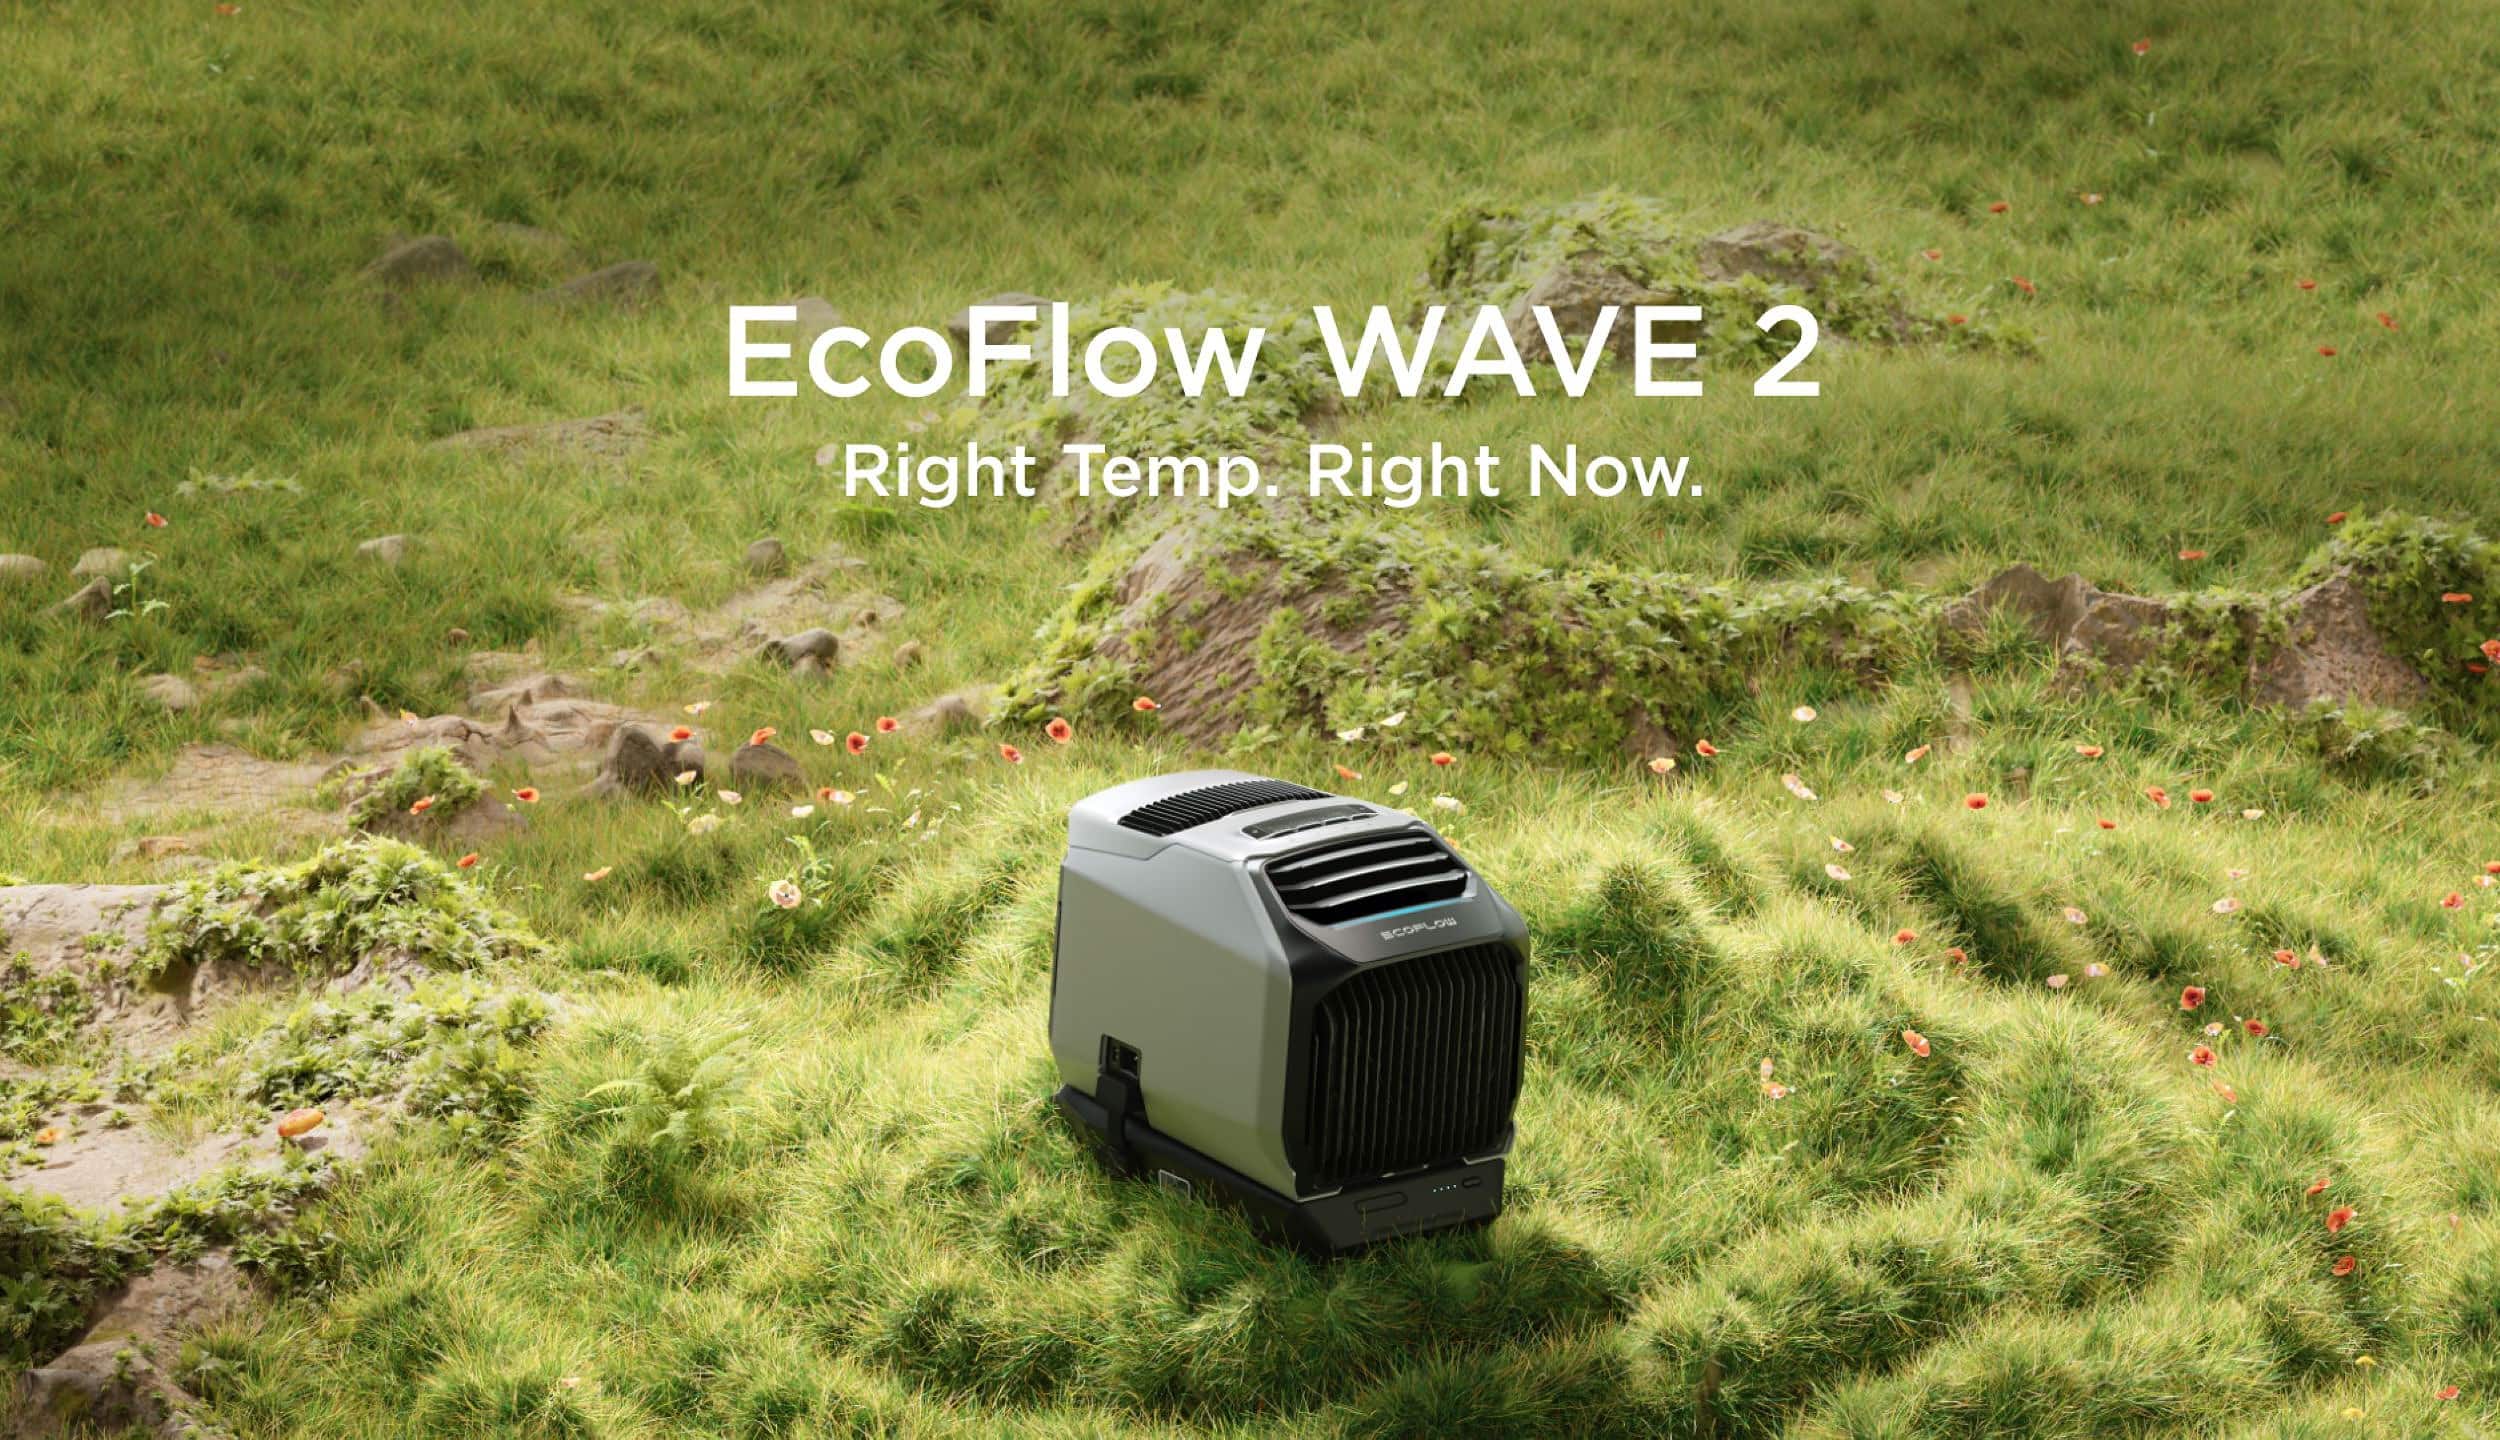 EcoFlow Wave 2 Portable Air Con for Off-Grid Living Launched for £1049 – Add on battery priced at £799